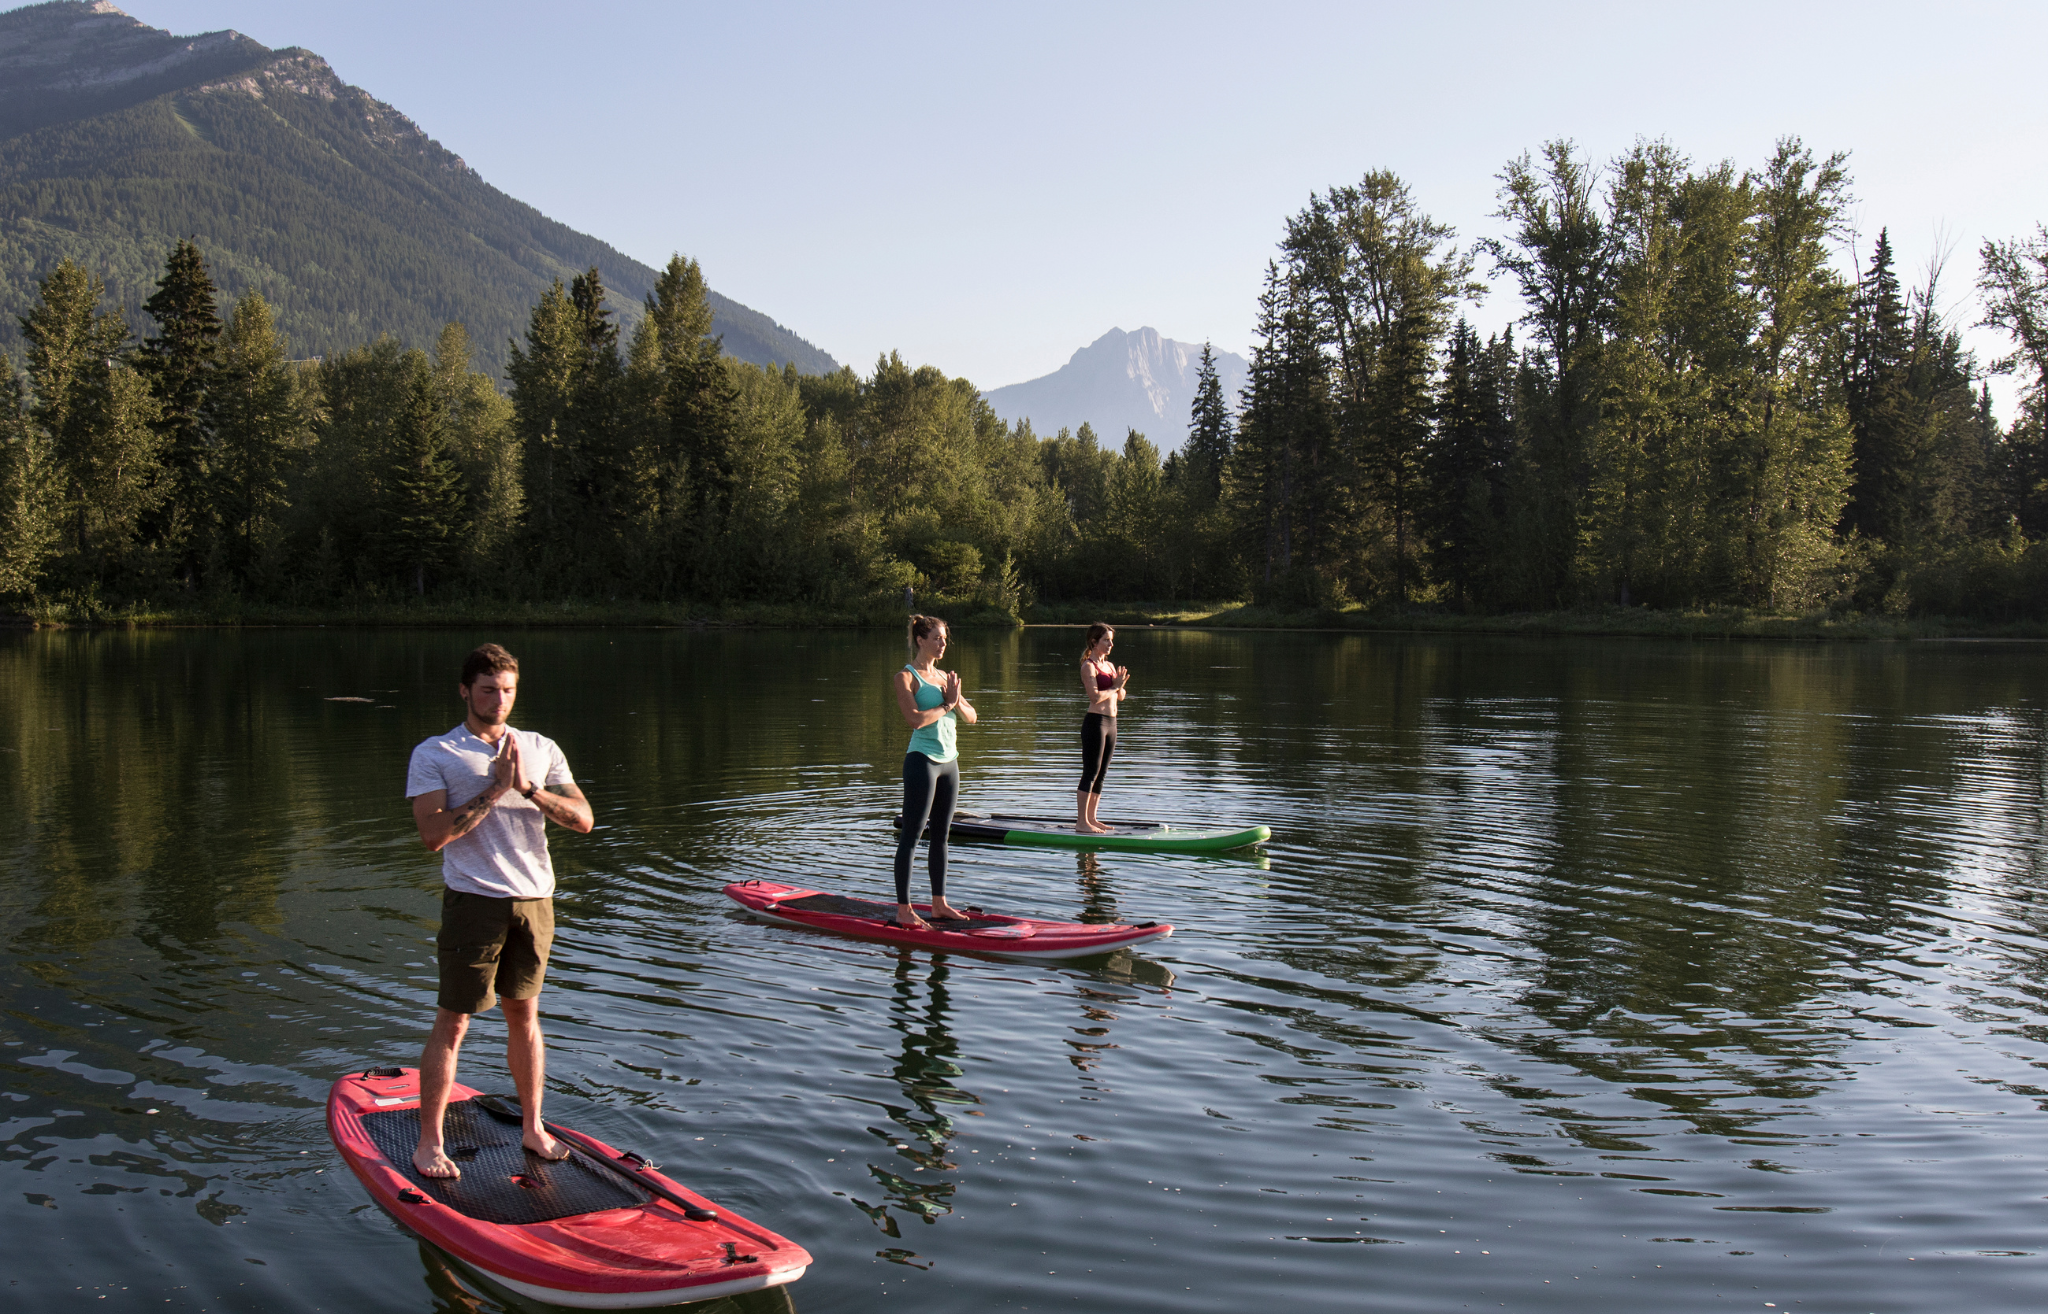 Three people doing yoga on stand up paddle boards on a mountain lake - Adventure Wise Travel Gear